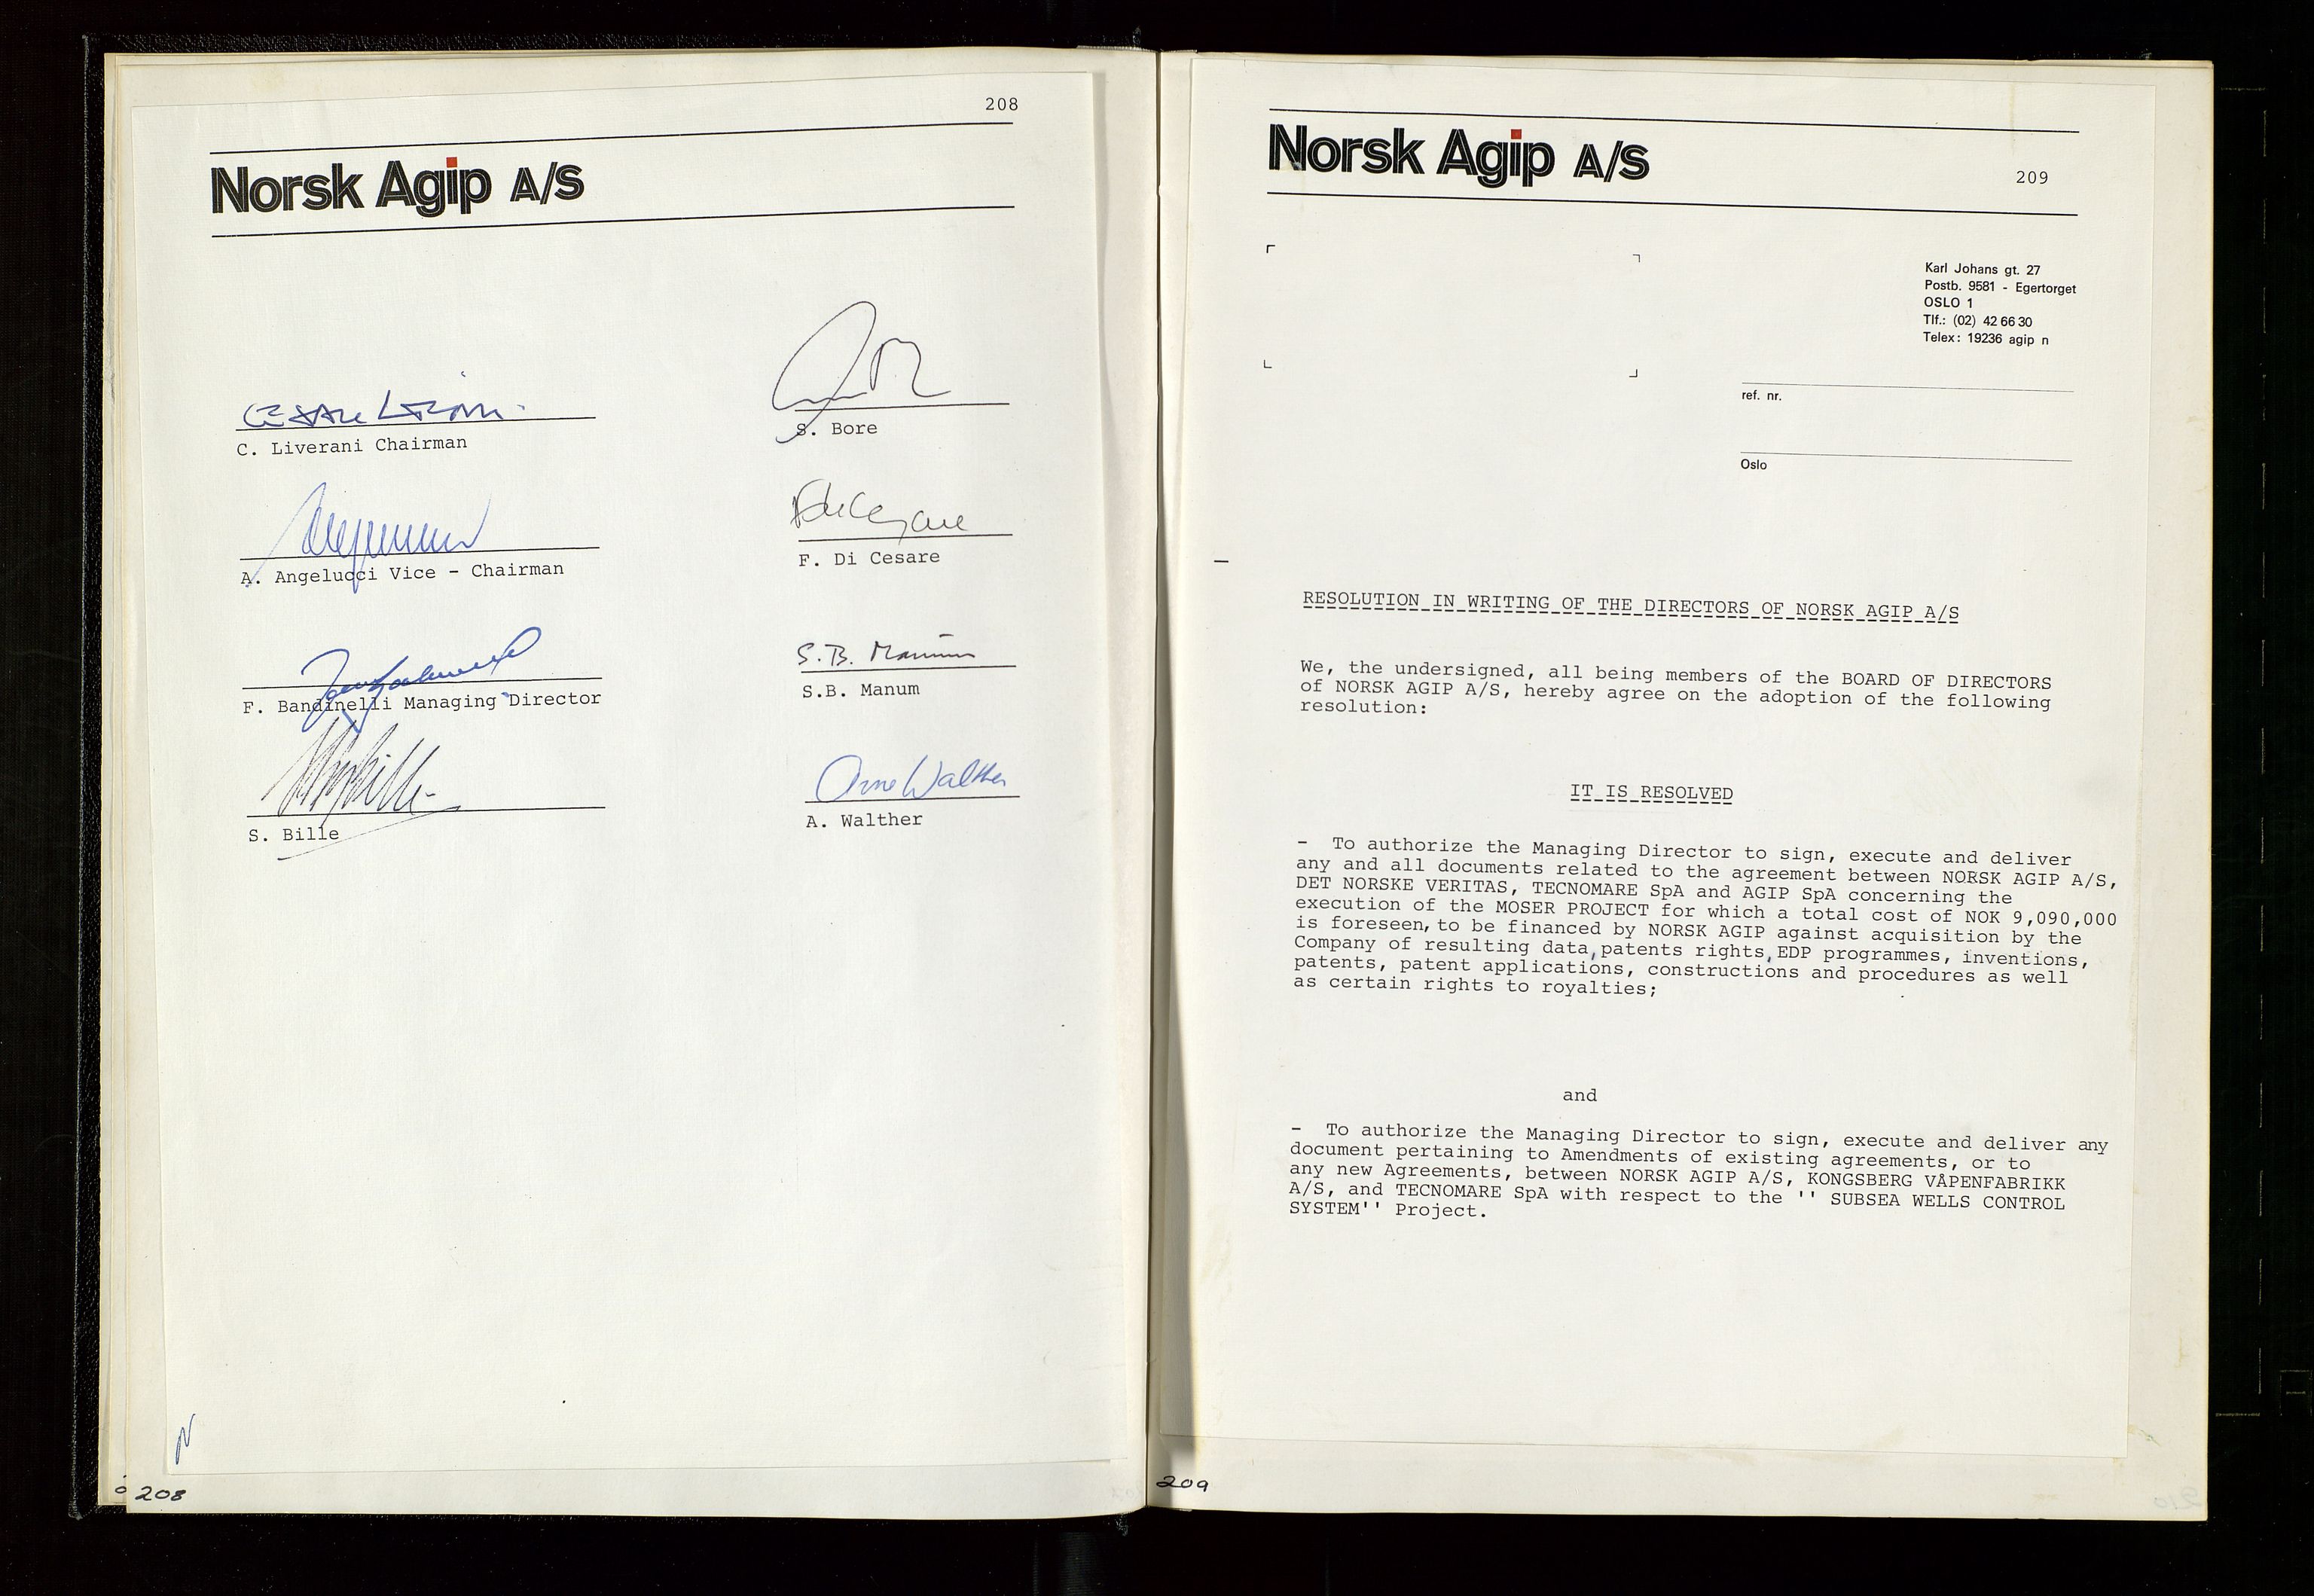 Pa 1583 - Norsk Agip AS, SAST/A-102138/A/Aa/L0003: Board of Directors meeting minutes, 1979-1983, p. 208-209